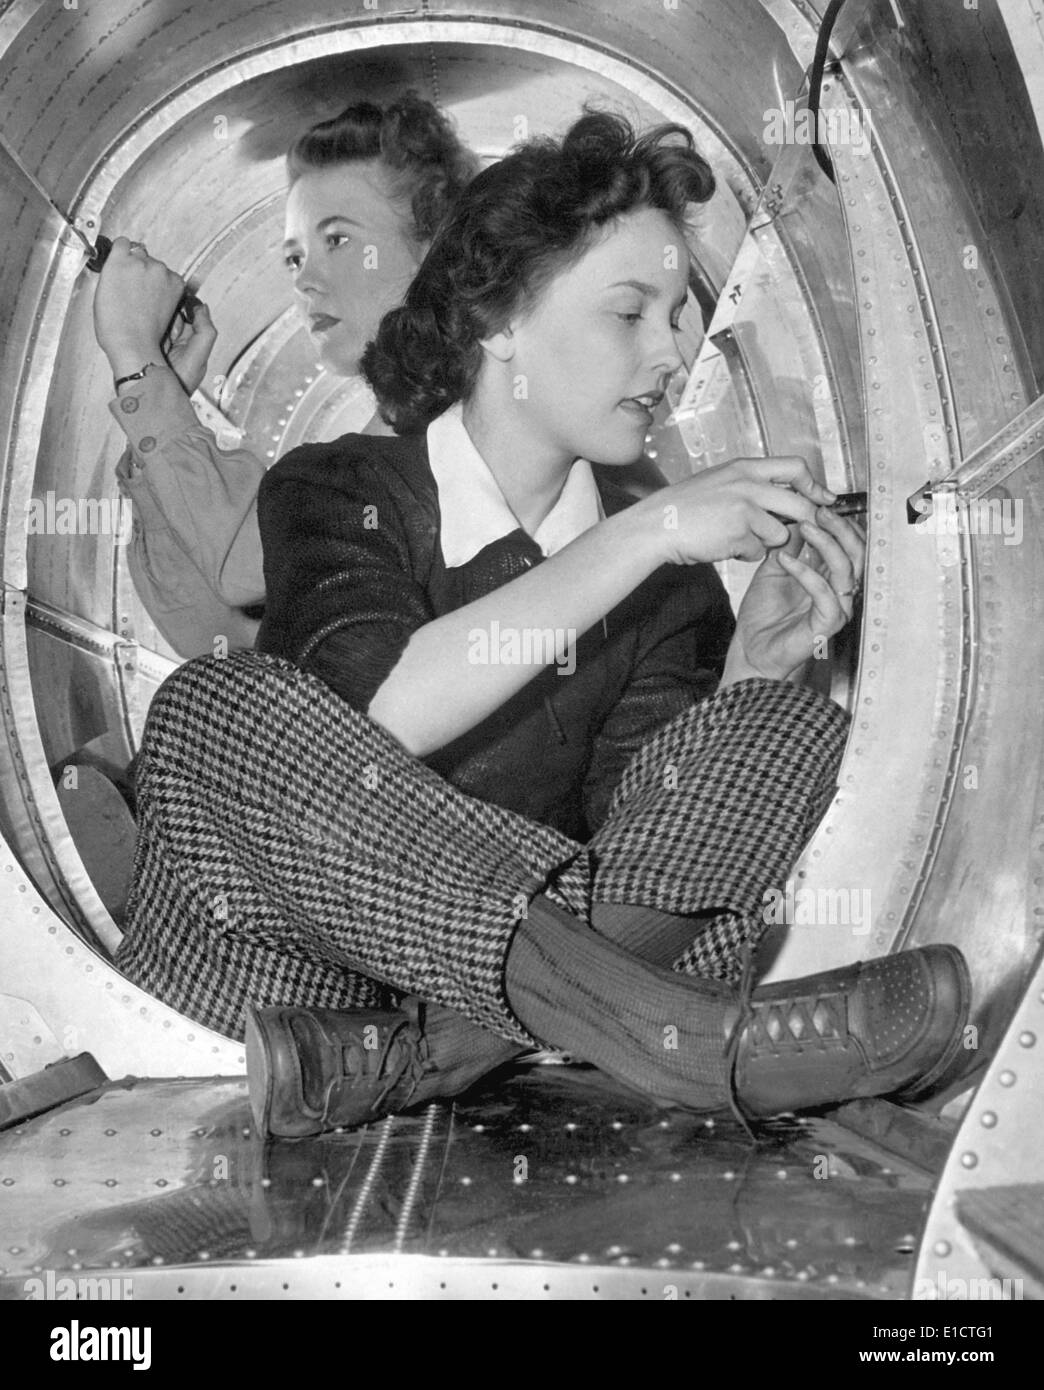 Two women workers in a cramped aircraft space at Grumman Aircraft Engineering Corp. During World War 2, ca. 1942-45. Stock Photo